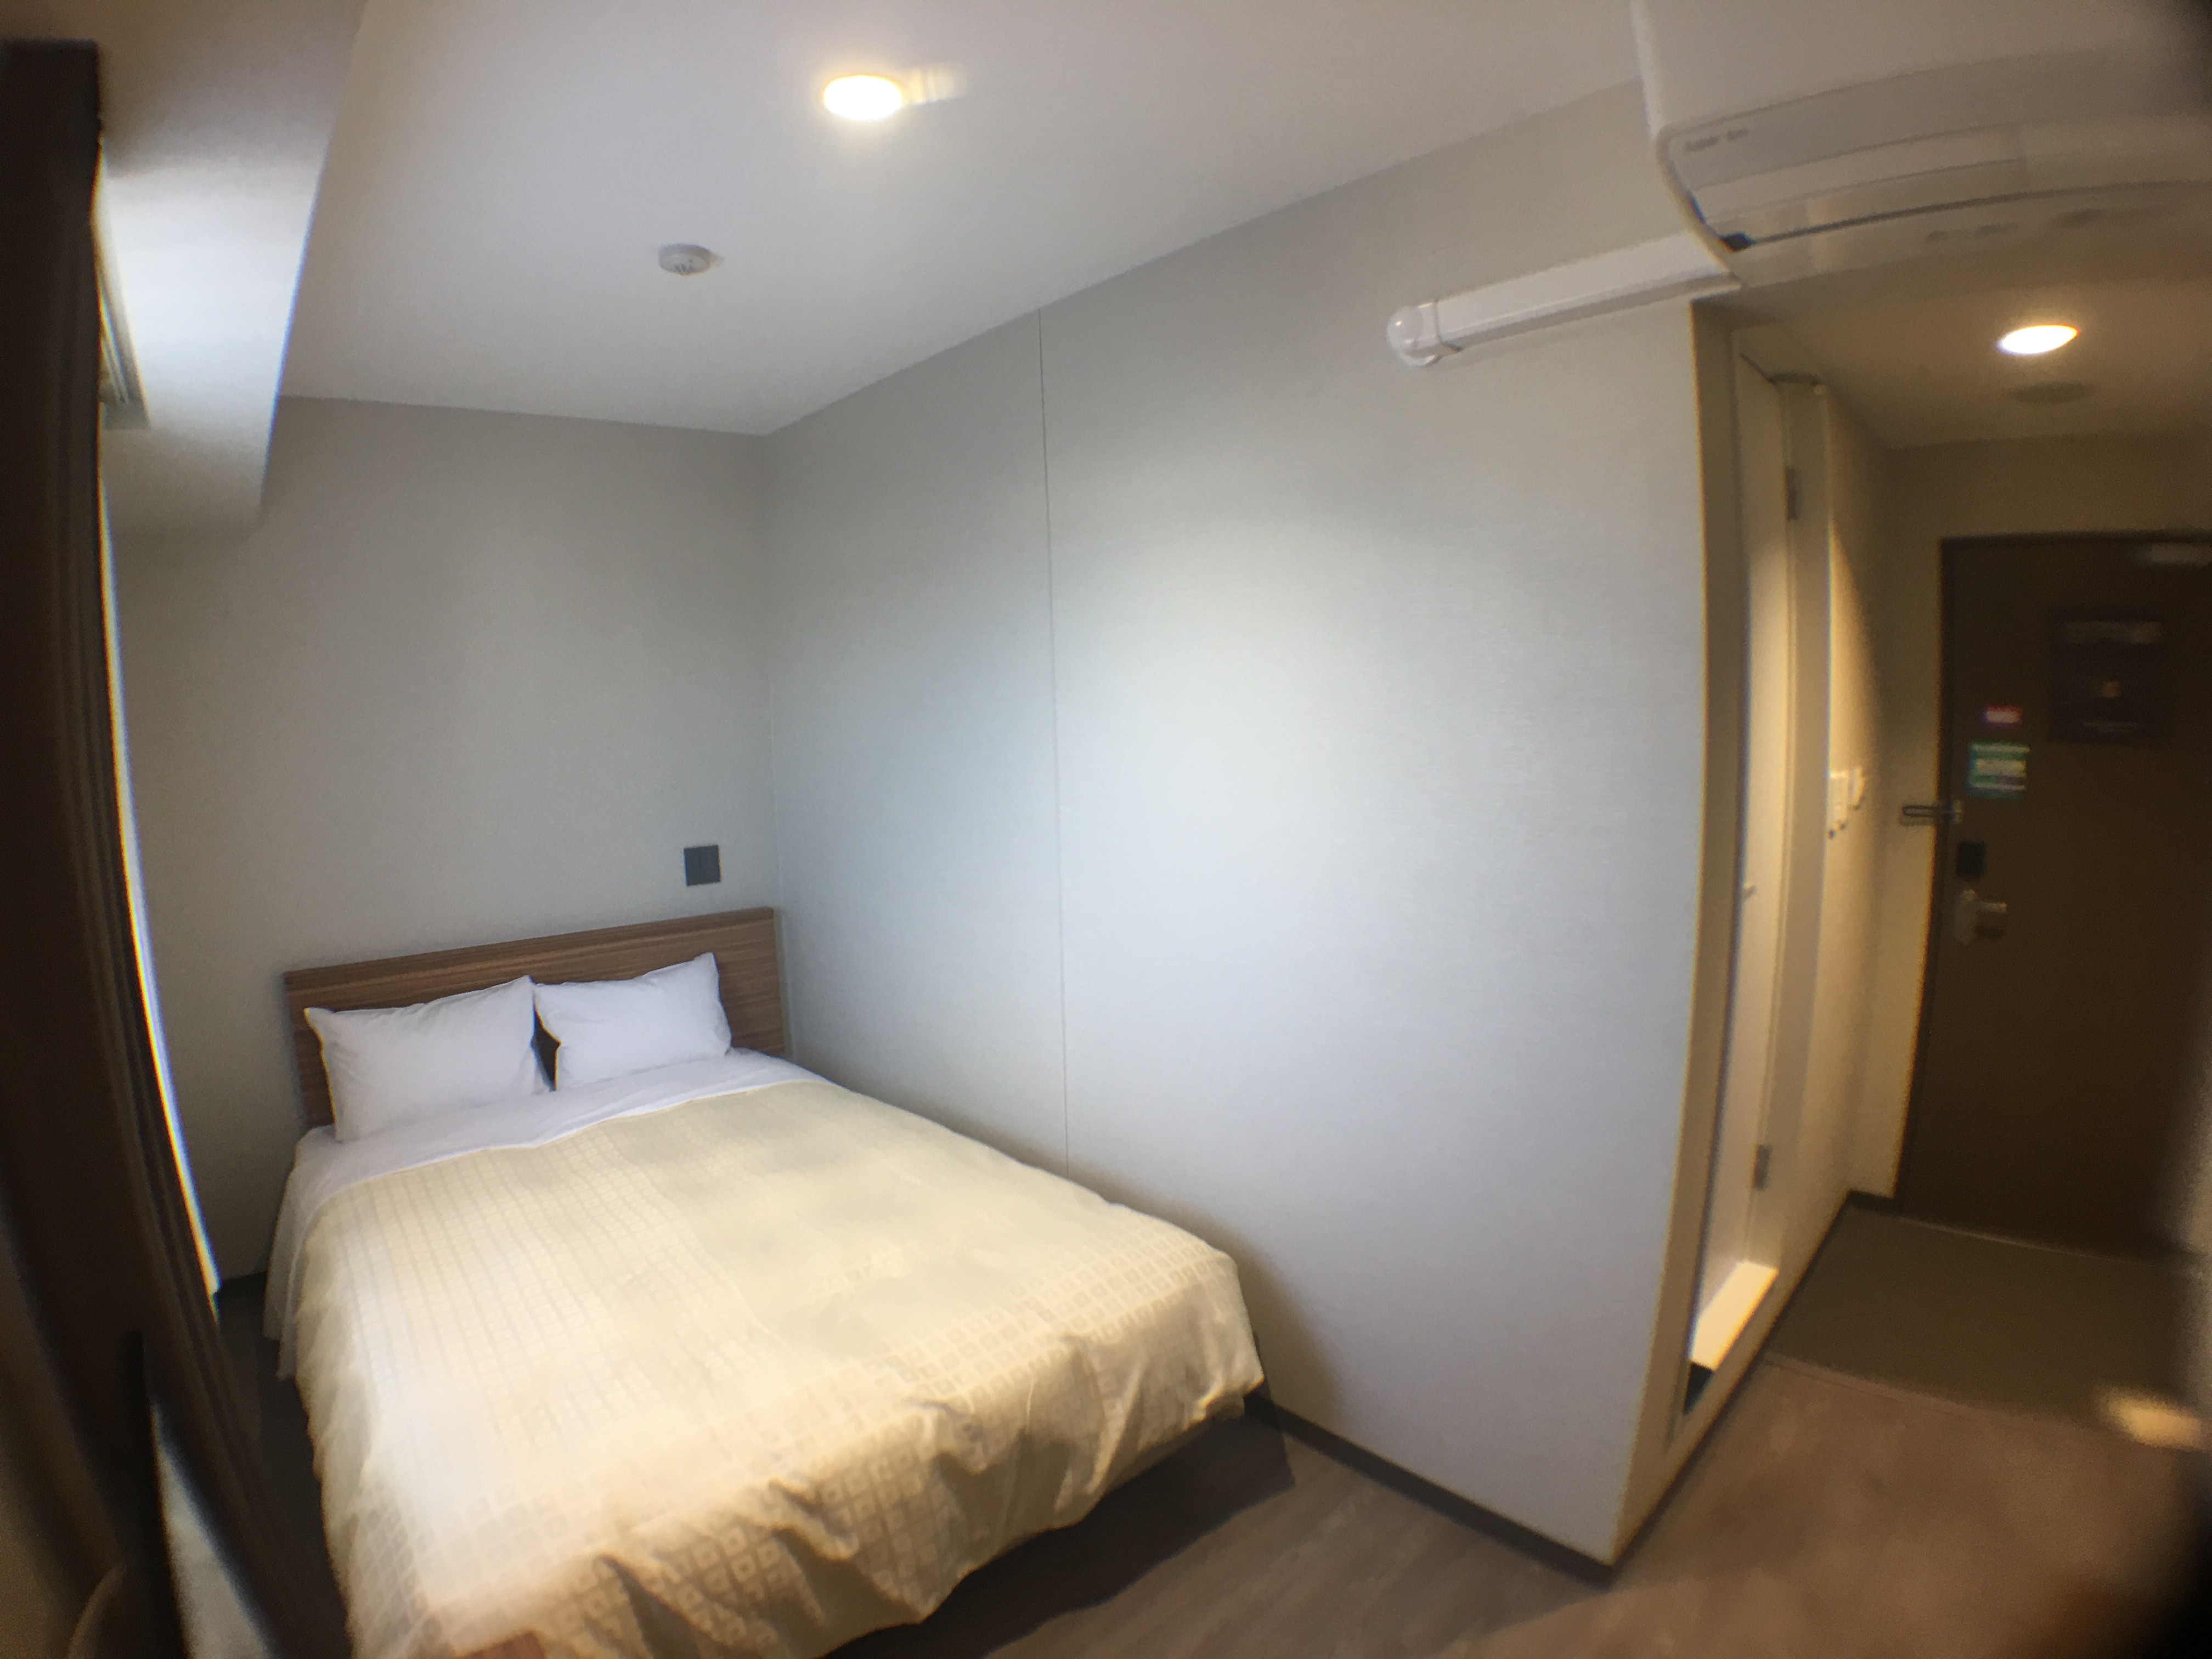 ☆ Semi-double room ☆ All rooms have 140 cm wide beds ♪